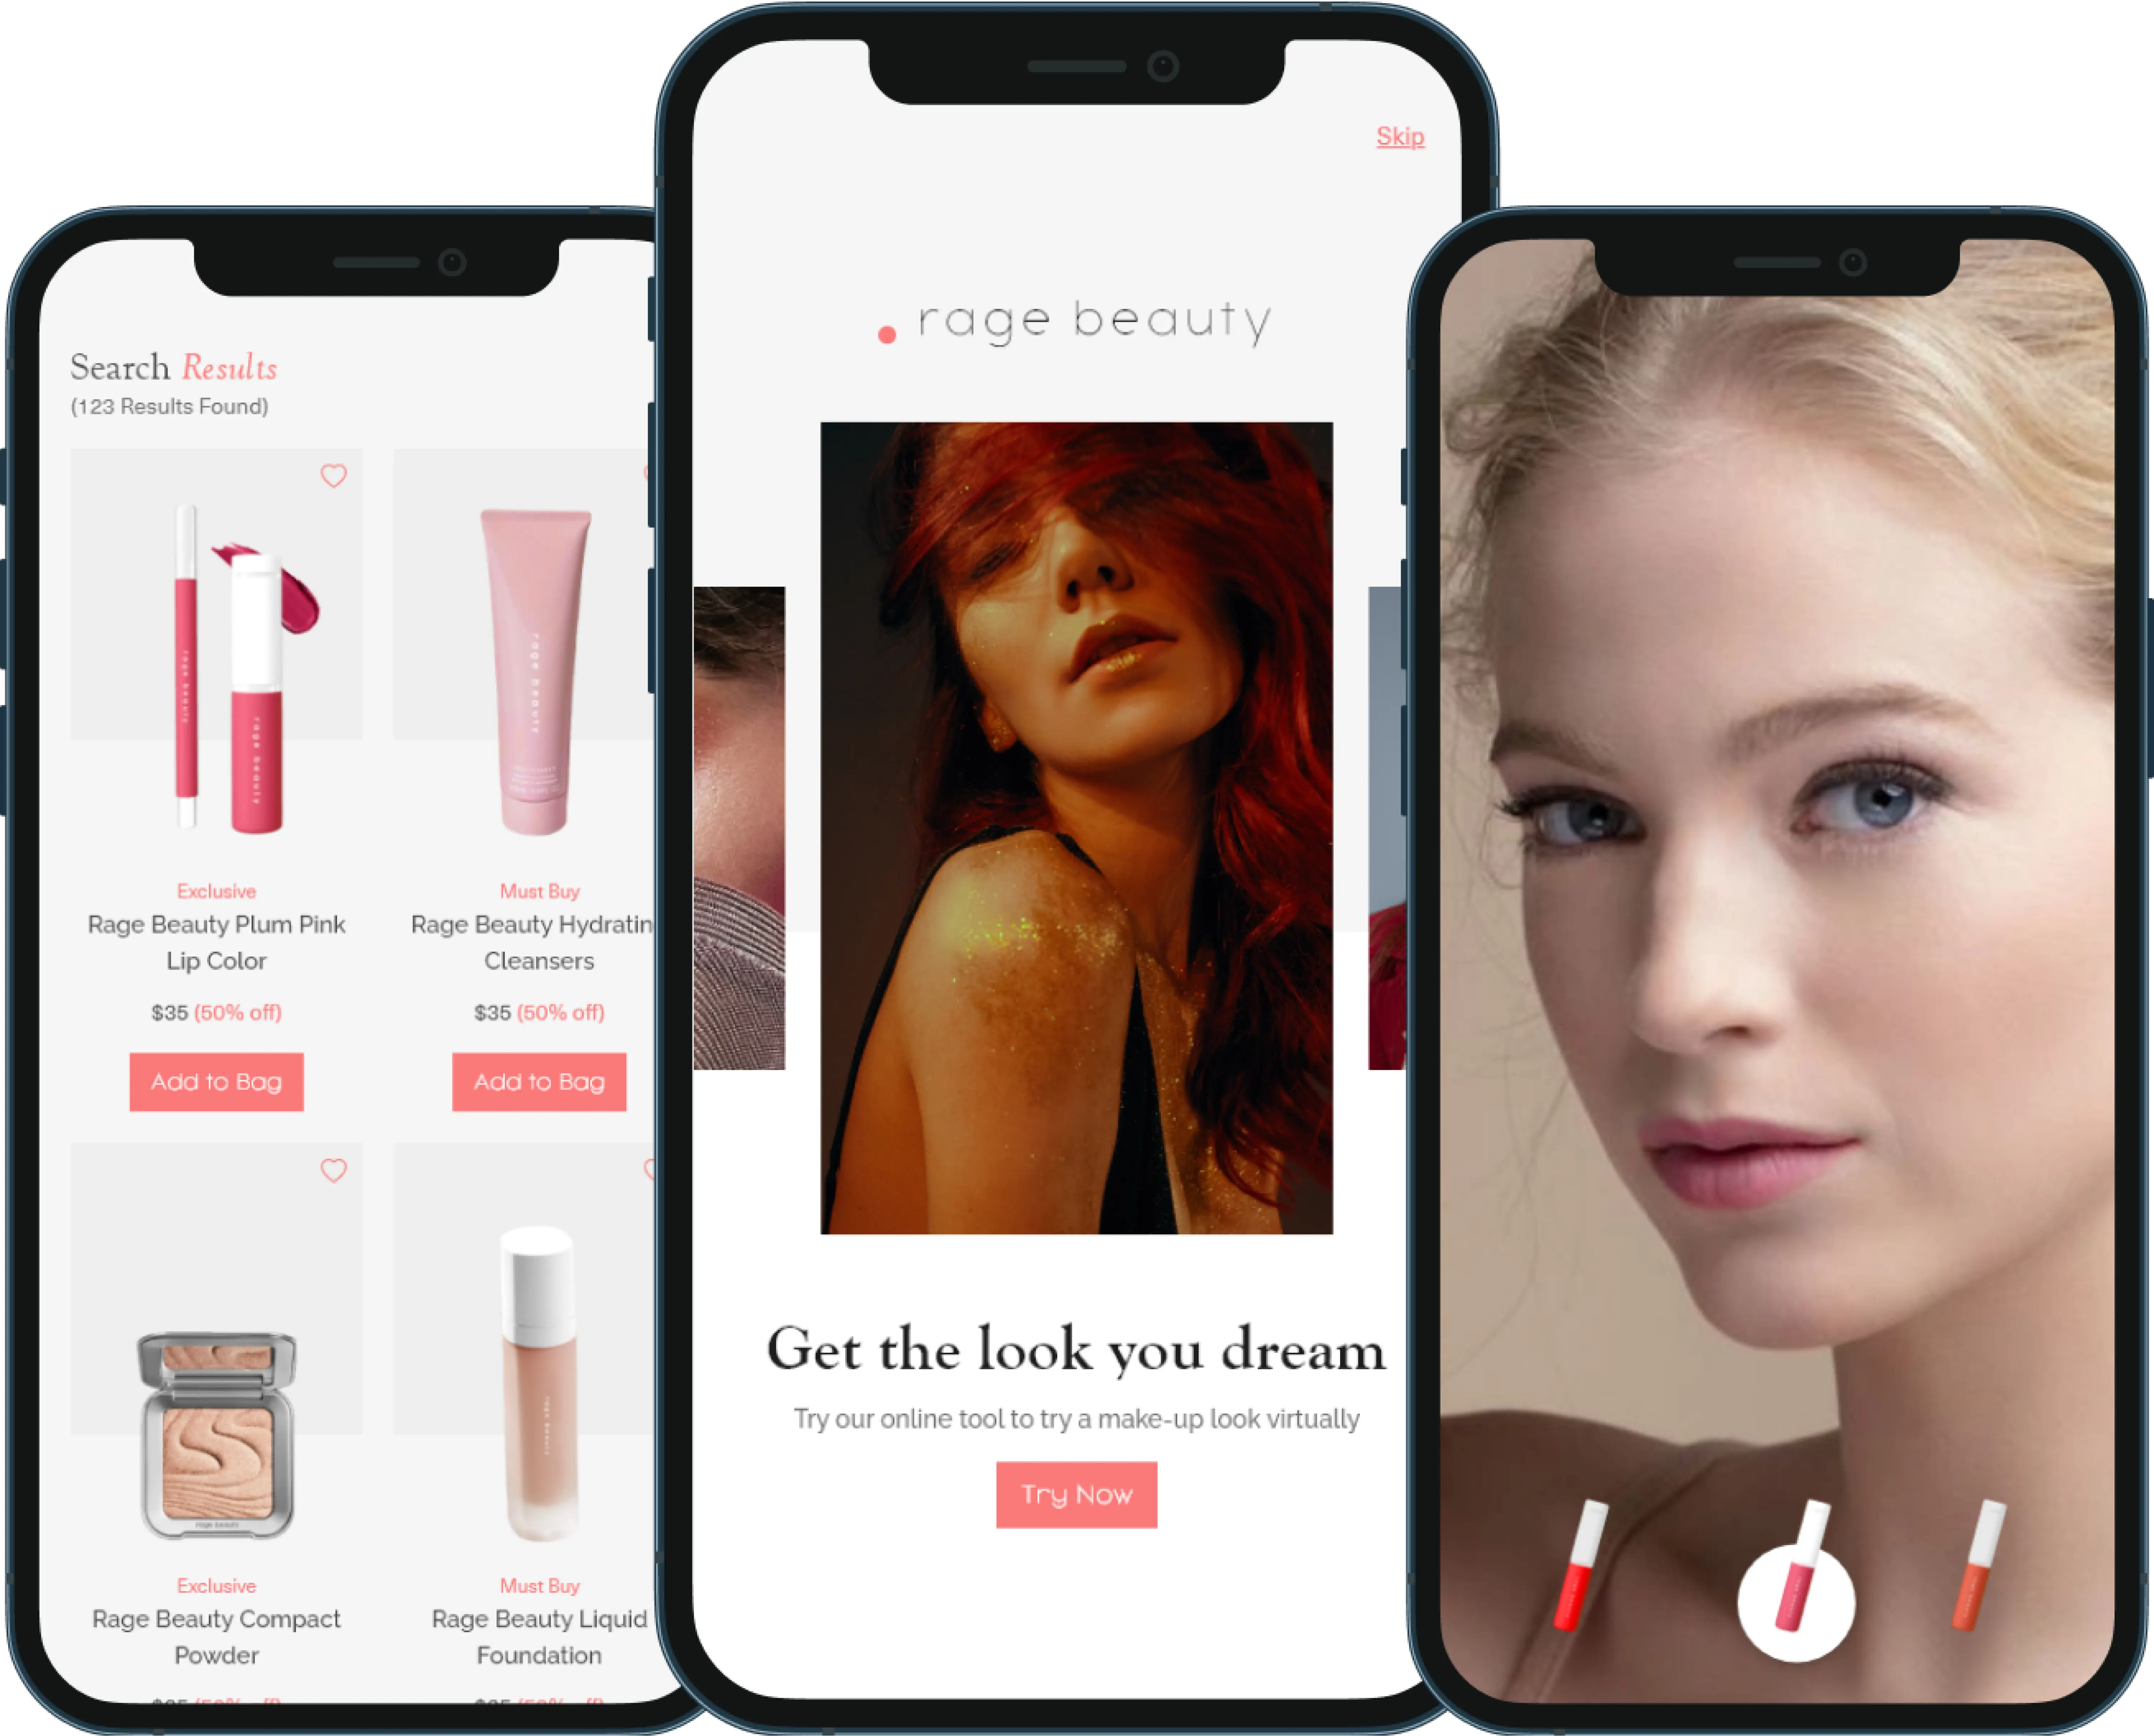 Three phone screens mockup displaying eCommerce app dashboard designs of a cosmetic brand